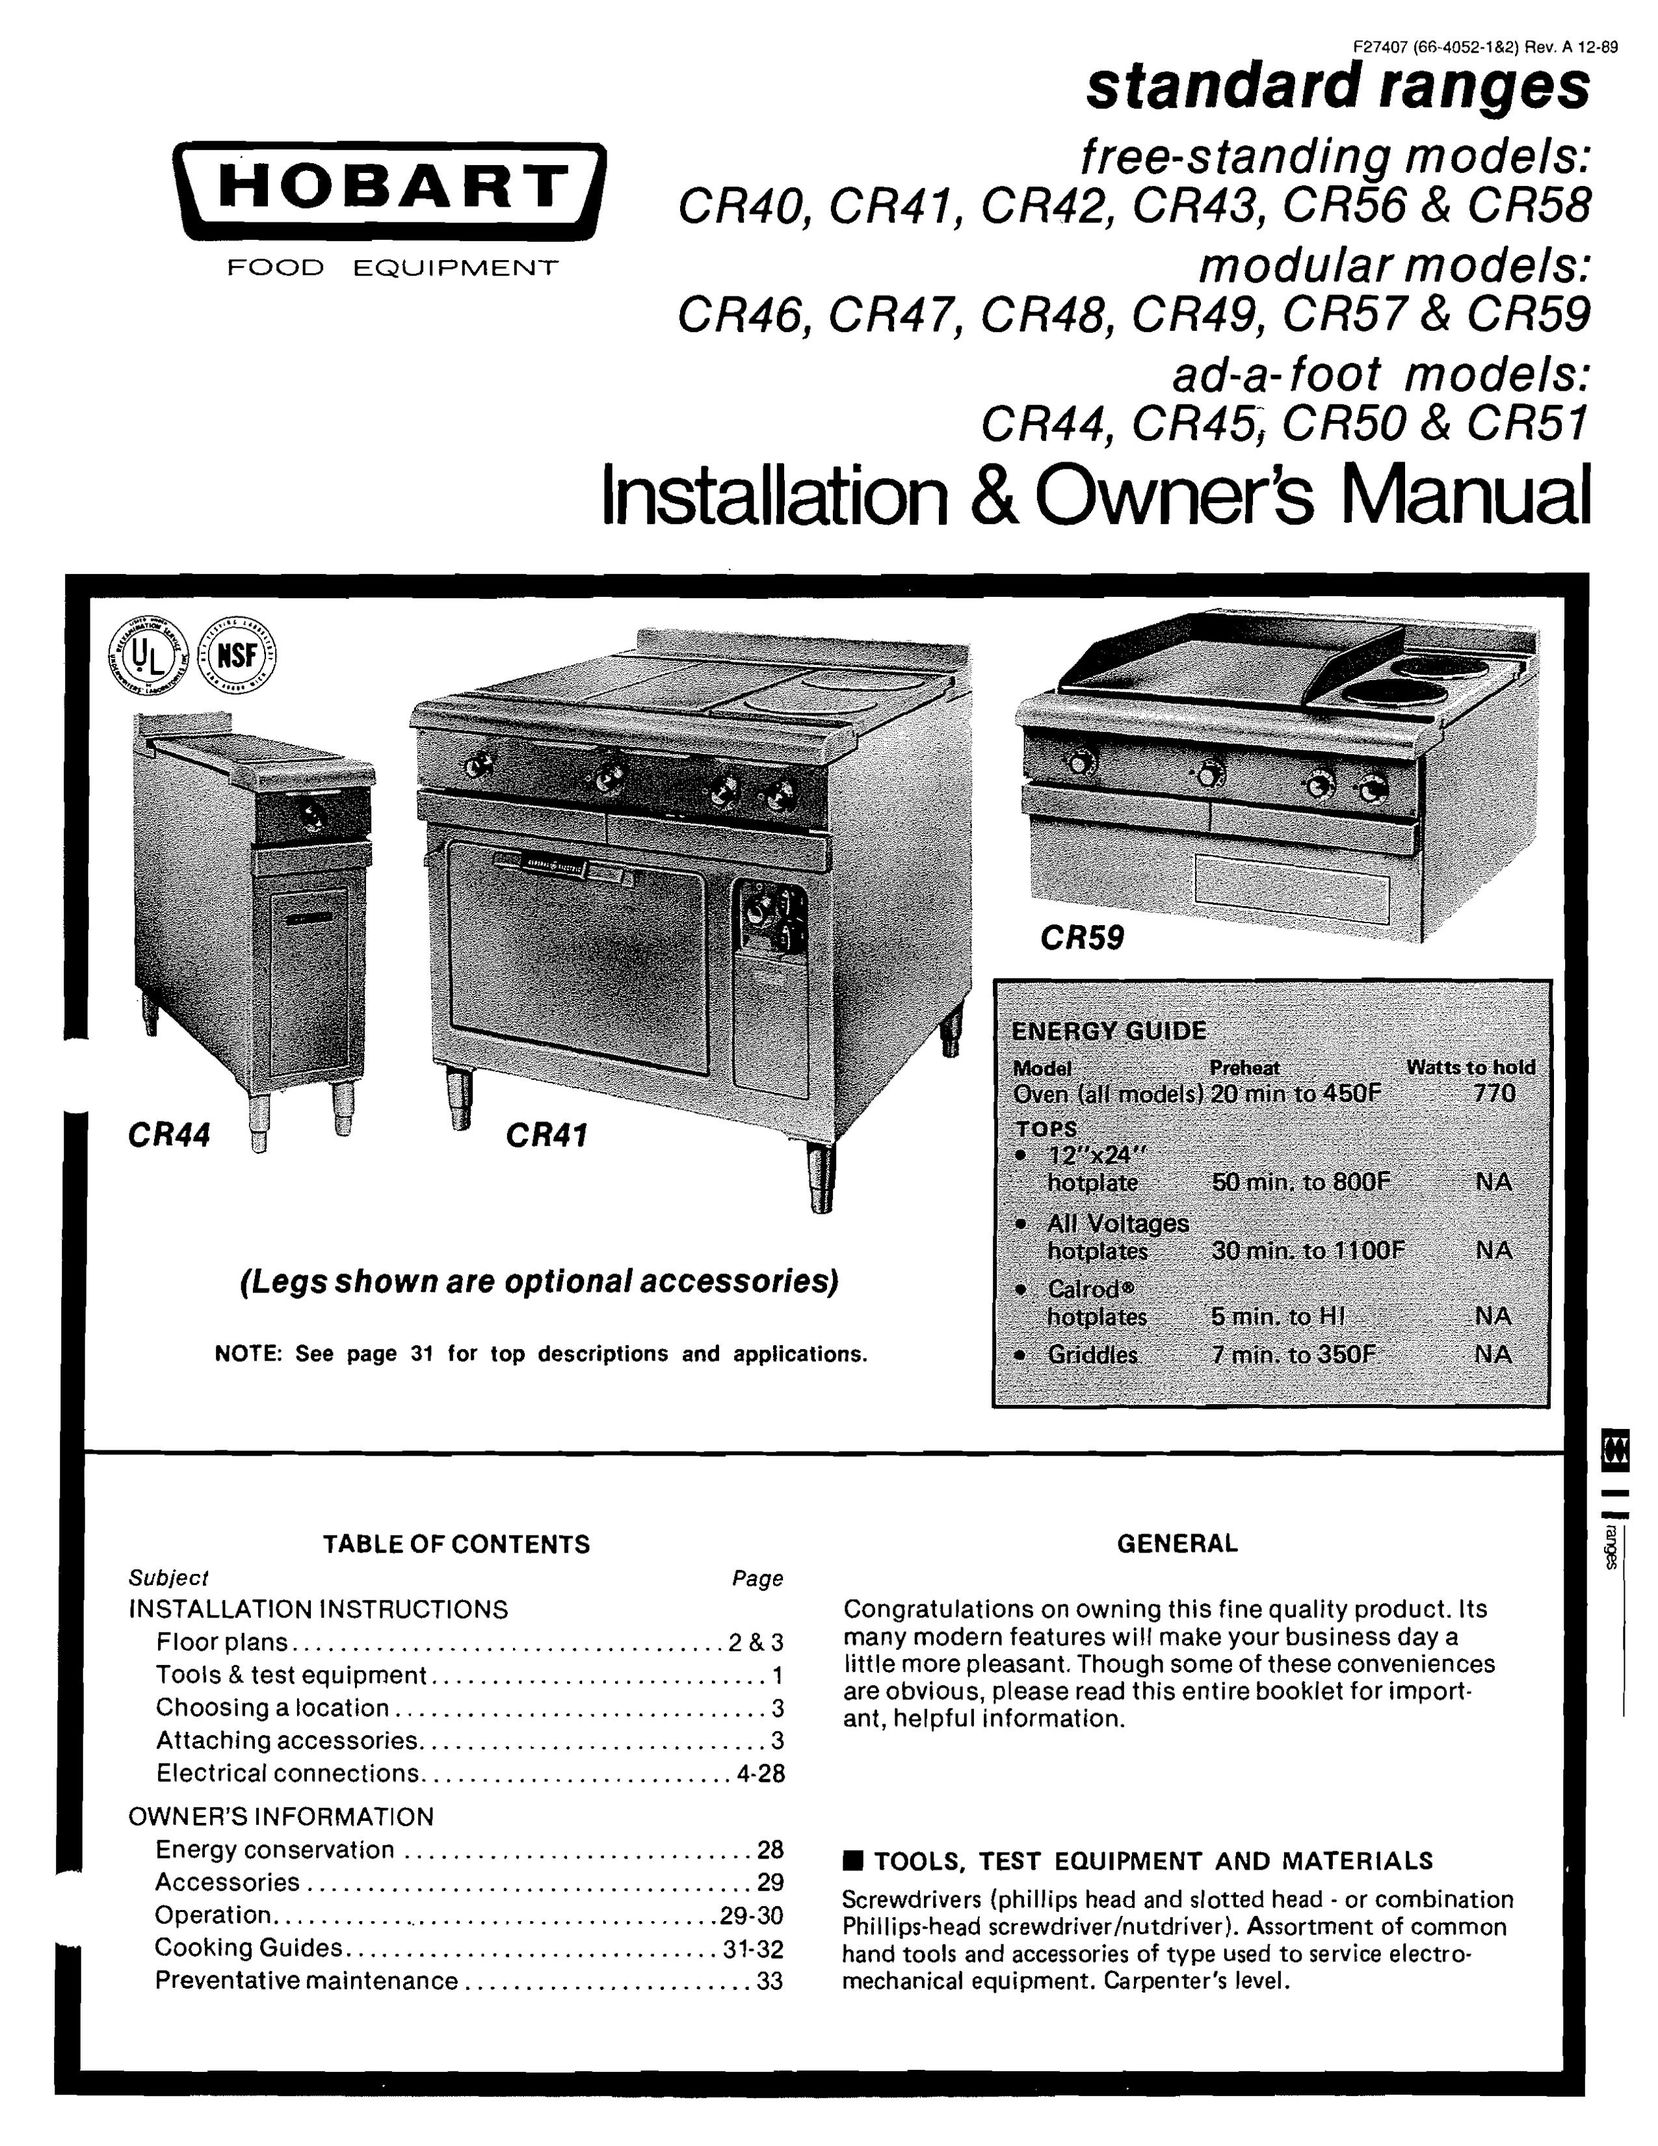 Hobart CR-43 Double Oven User Manual